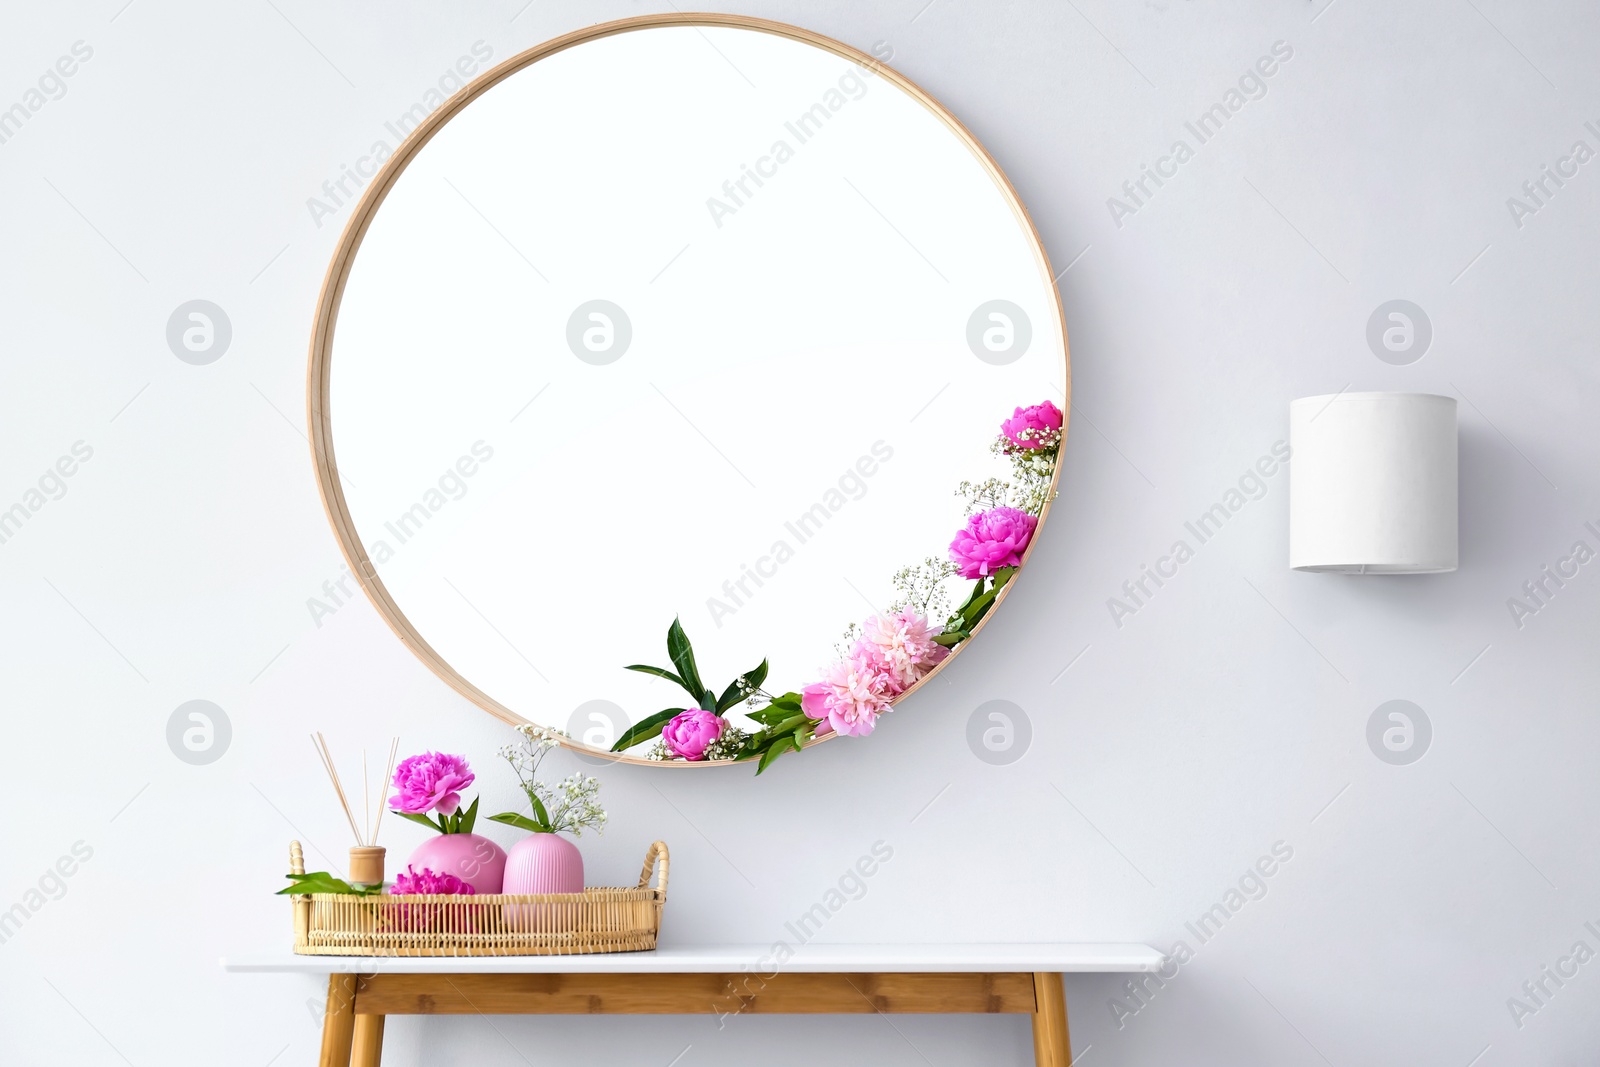 Photo of Round mirror and table with accessories near white wall in modern room interior